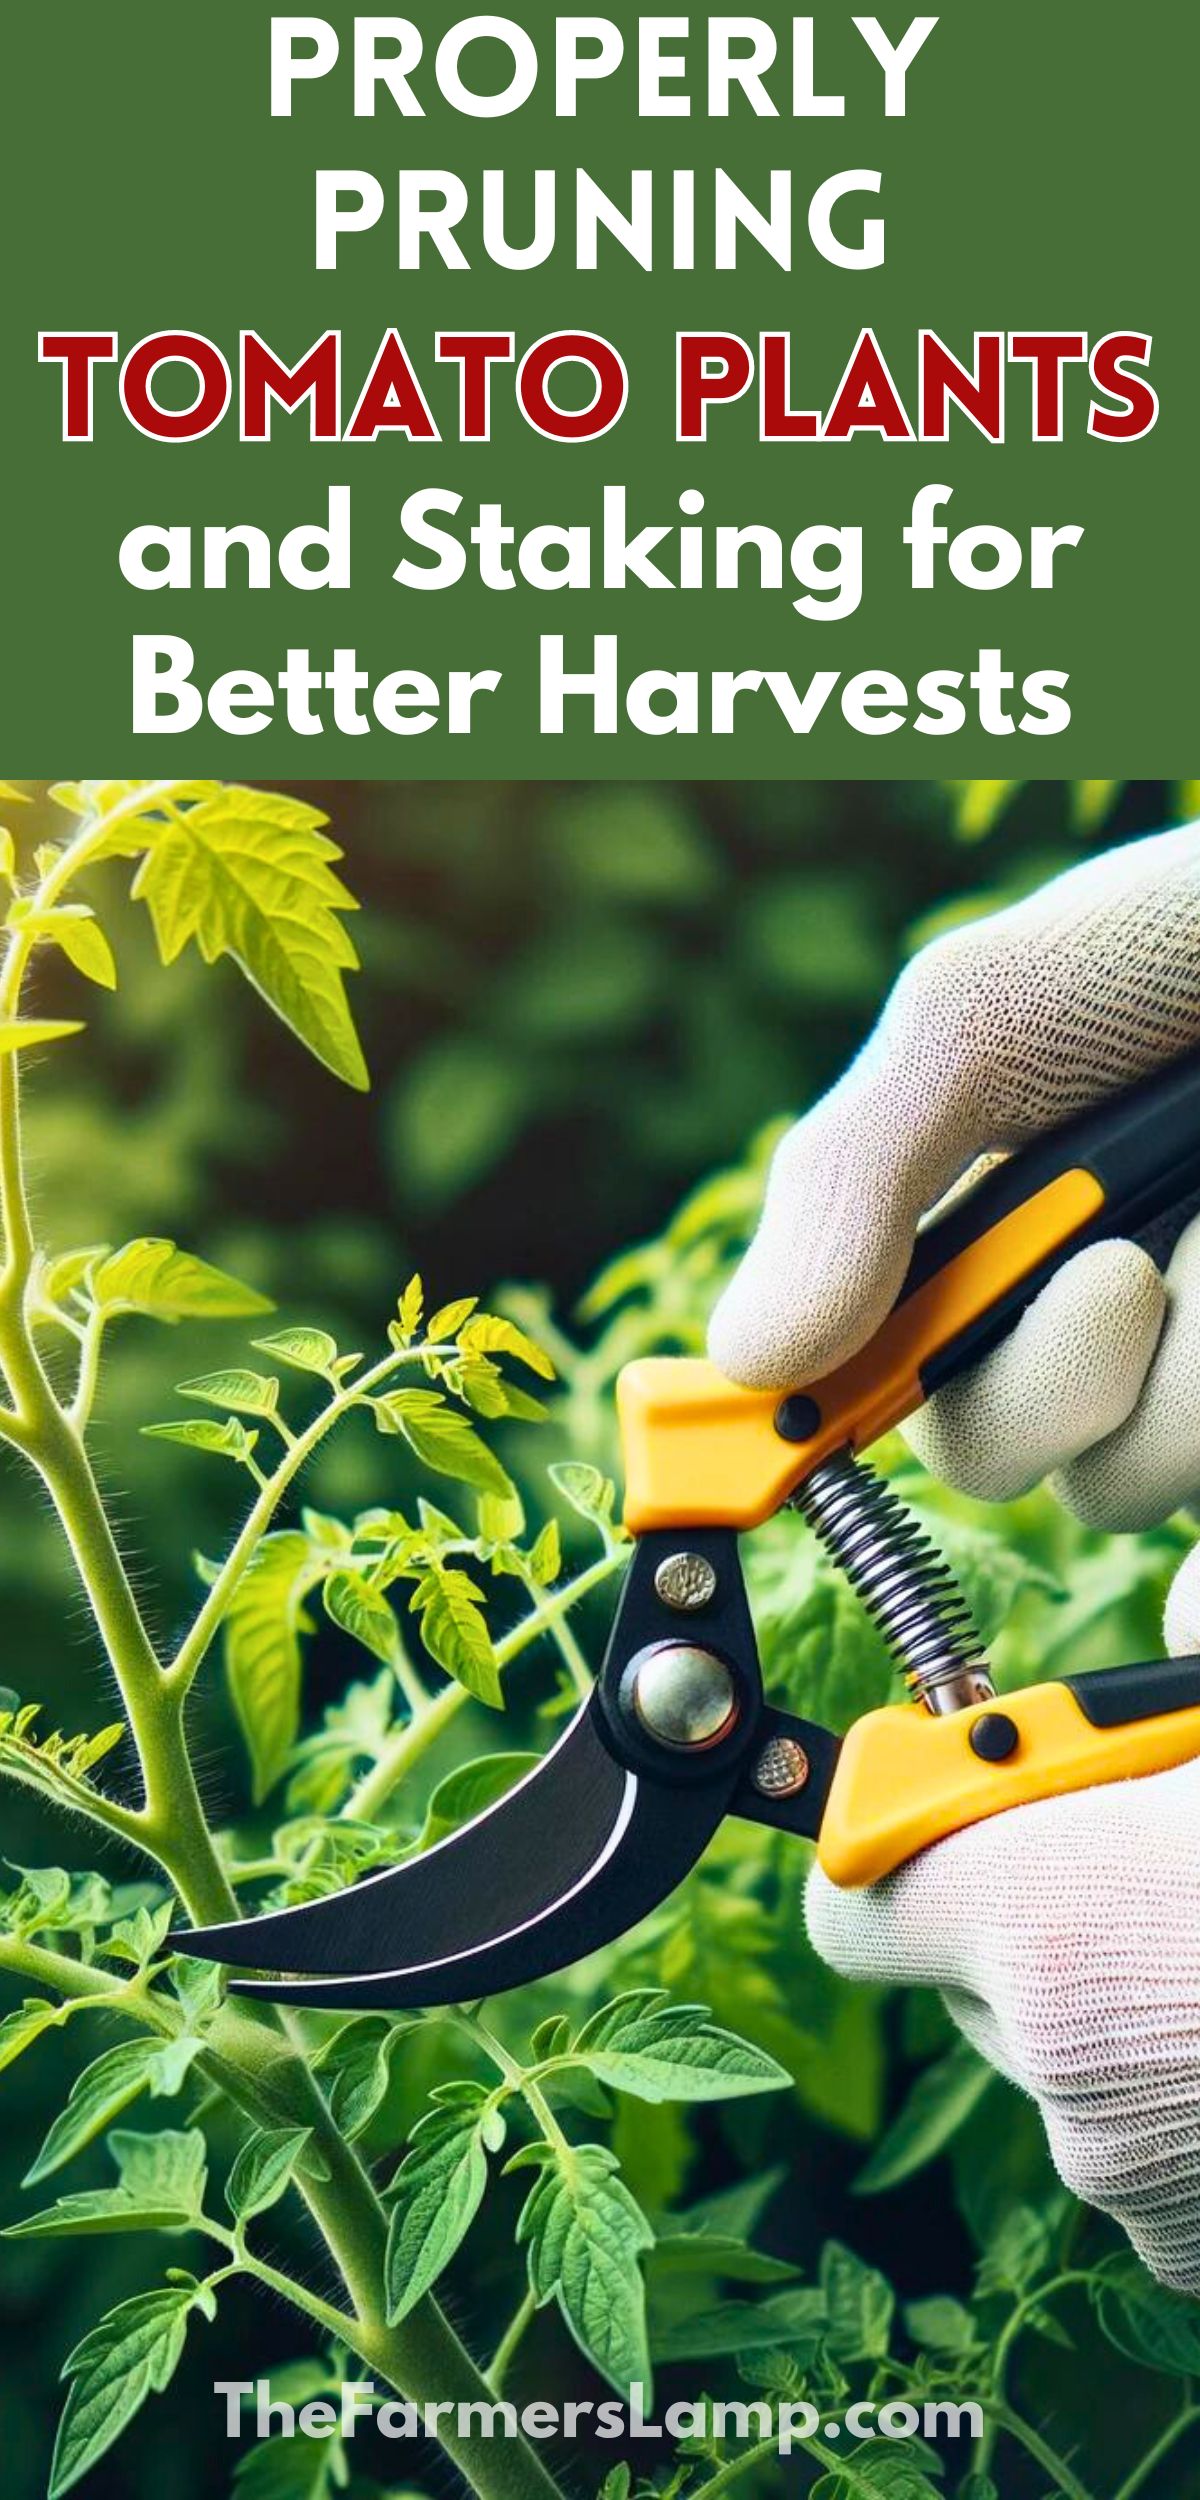 womans hand wearing garden gloves holding gardening shears near a tomato plant with words written that read properly pruning tomato plants and staking them for better harvest the farmers lamp dot com